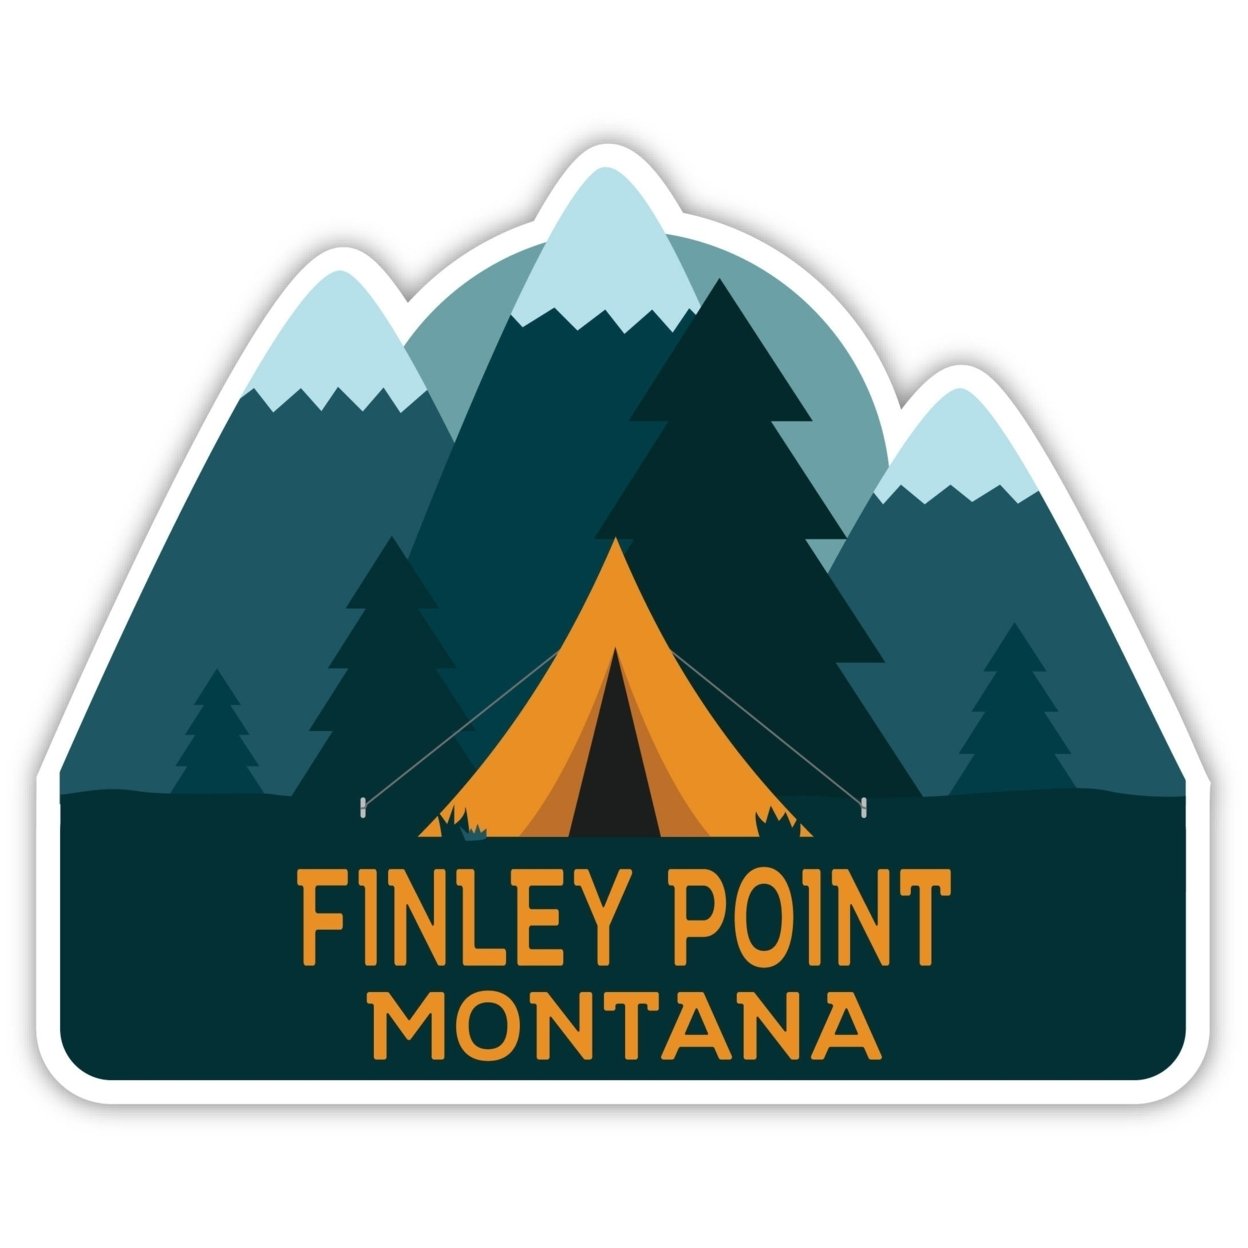 Finley Point Montana Souvenir Decorative Stickers (Choose Theme And Size) - 4-Pack, 6-Inch, Tent